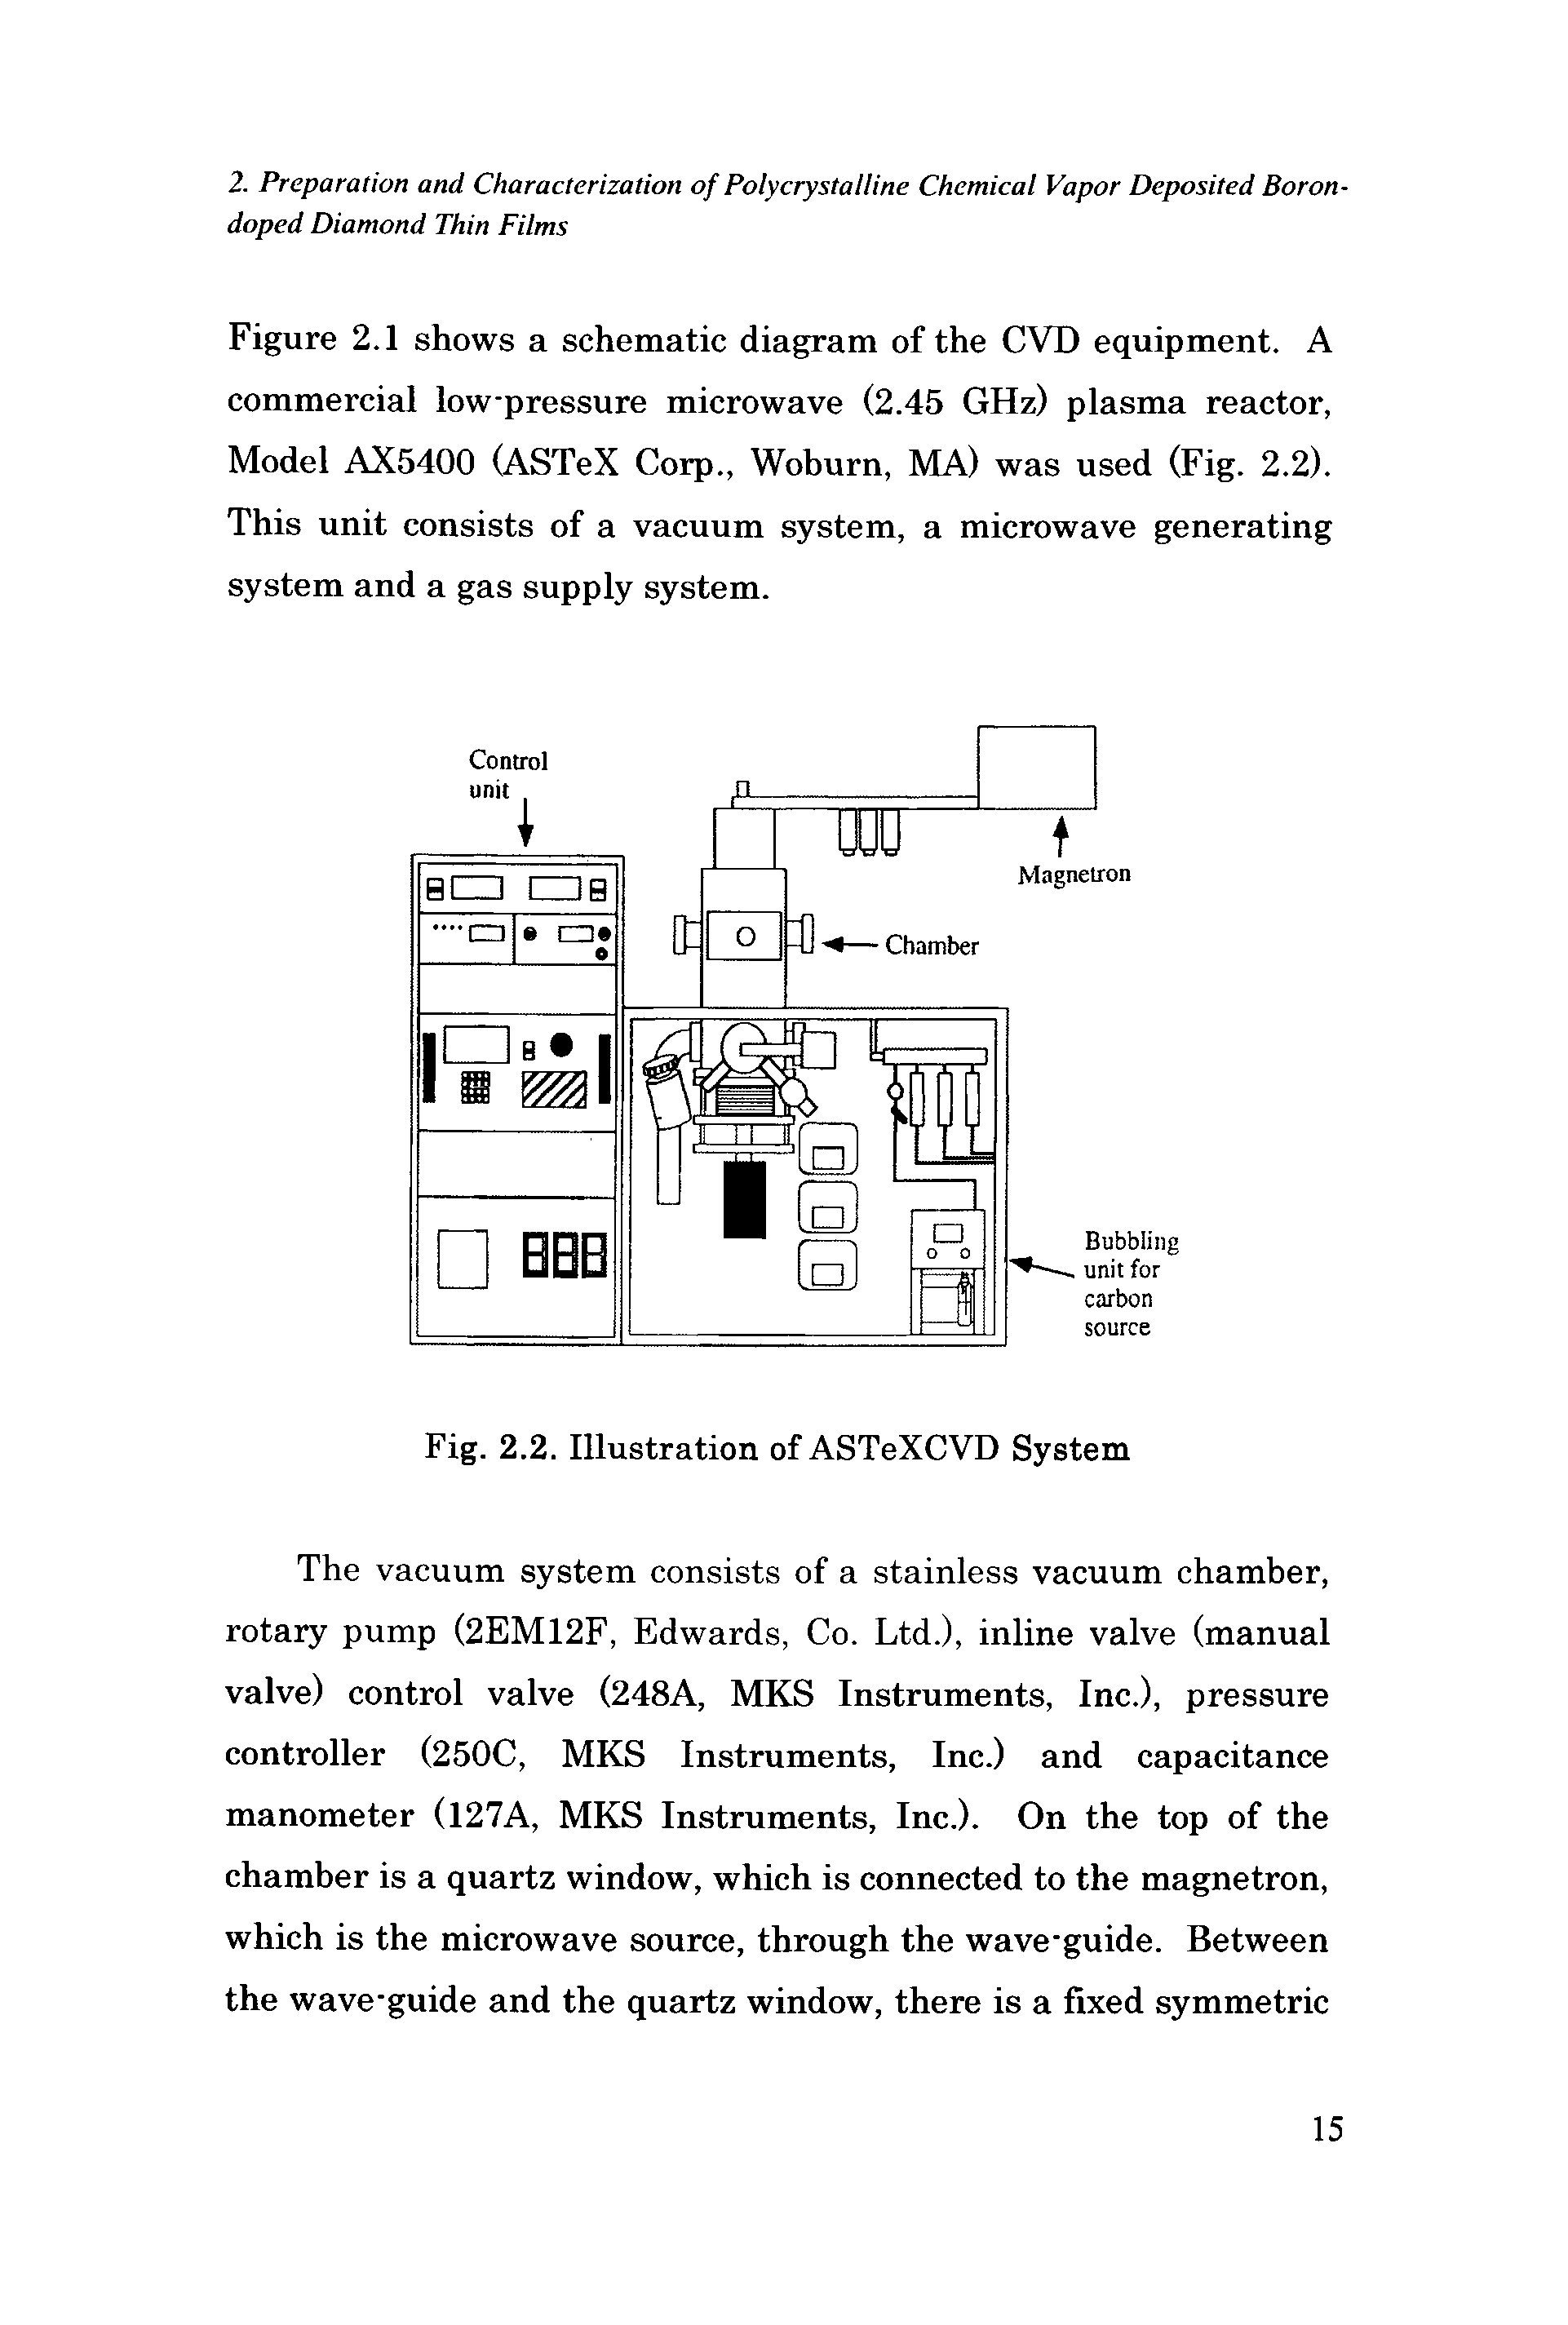 Figure 2.1 shows a schematic diagram of the CVD equipment. A commercial low-pressure microwave (2.45 GHz) plasma reactor, Model AX5400 (ASTeX Coip., Wohurn, MA) was used (Fig. 2.2). This unit consists of a vacuum system, a microwave generating system and a gas supply system.